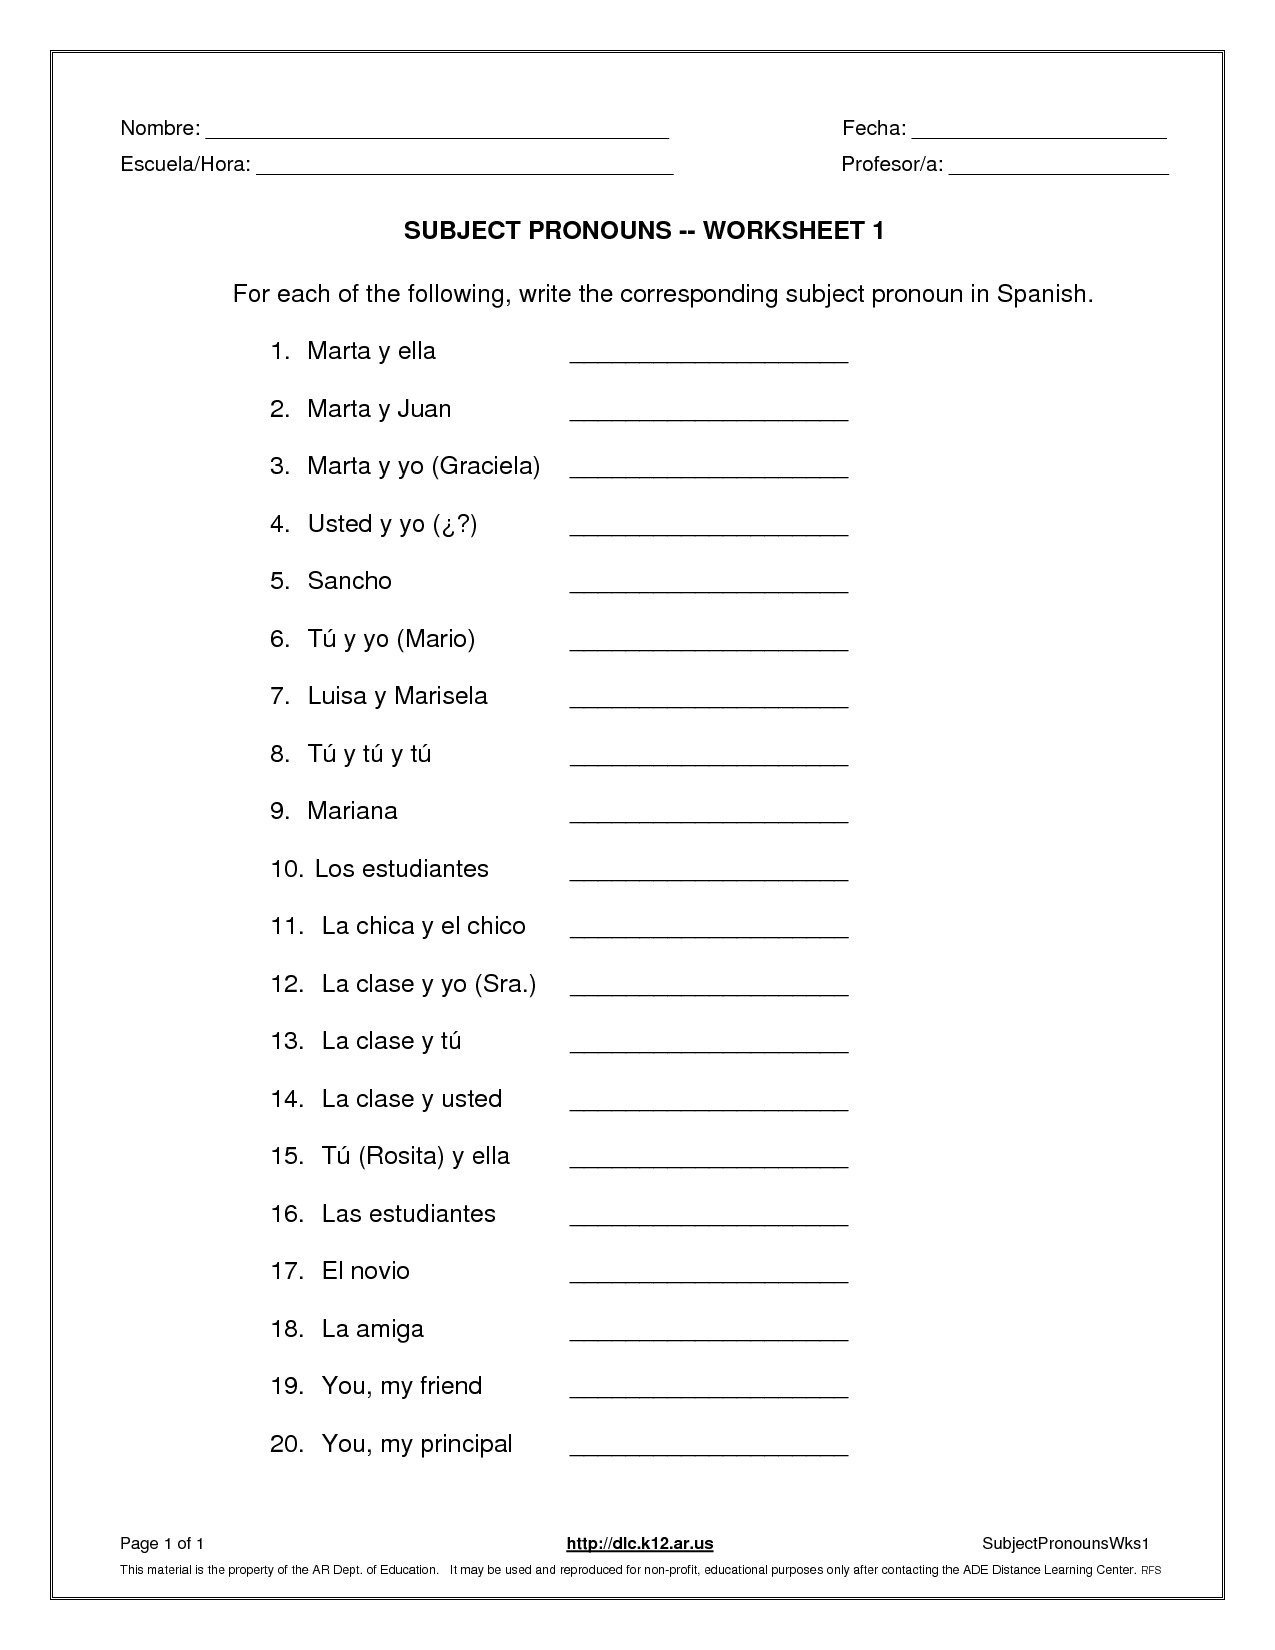 Subject And Object Pronouns Worksheet Subject Pronouns Db excel